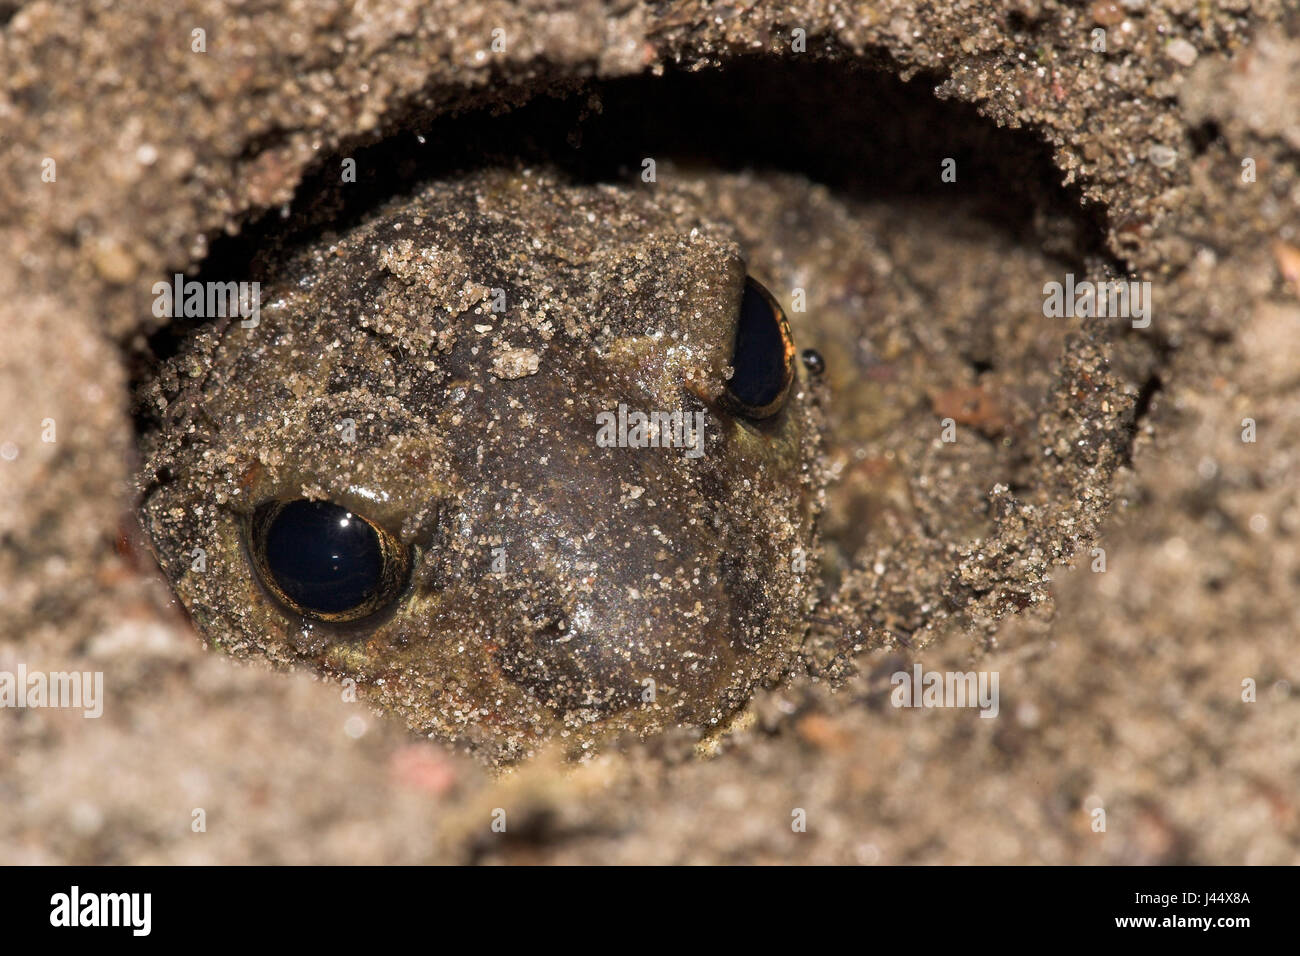 Common Spadefoot in a hole Stock Photo